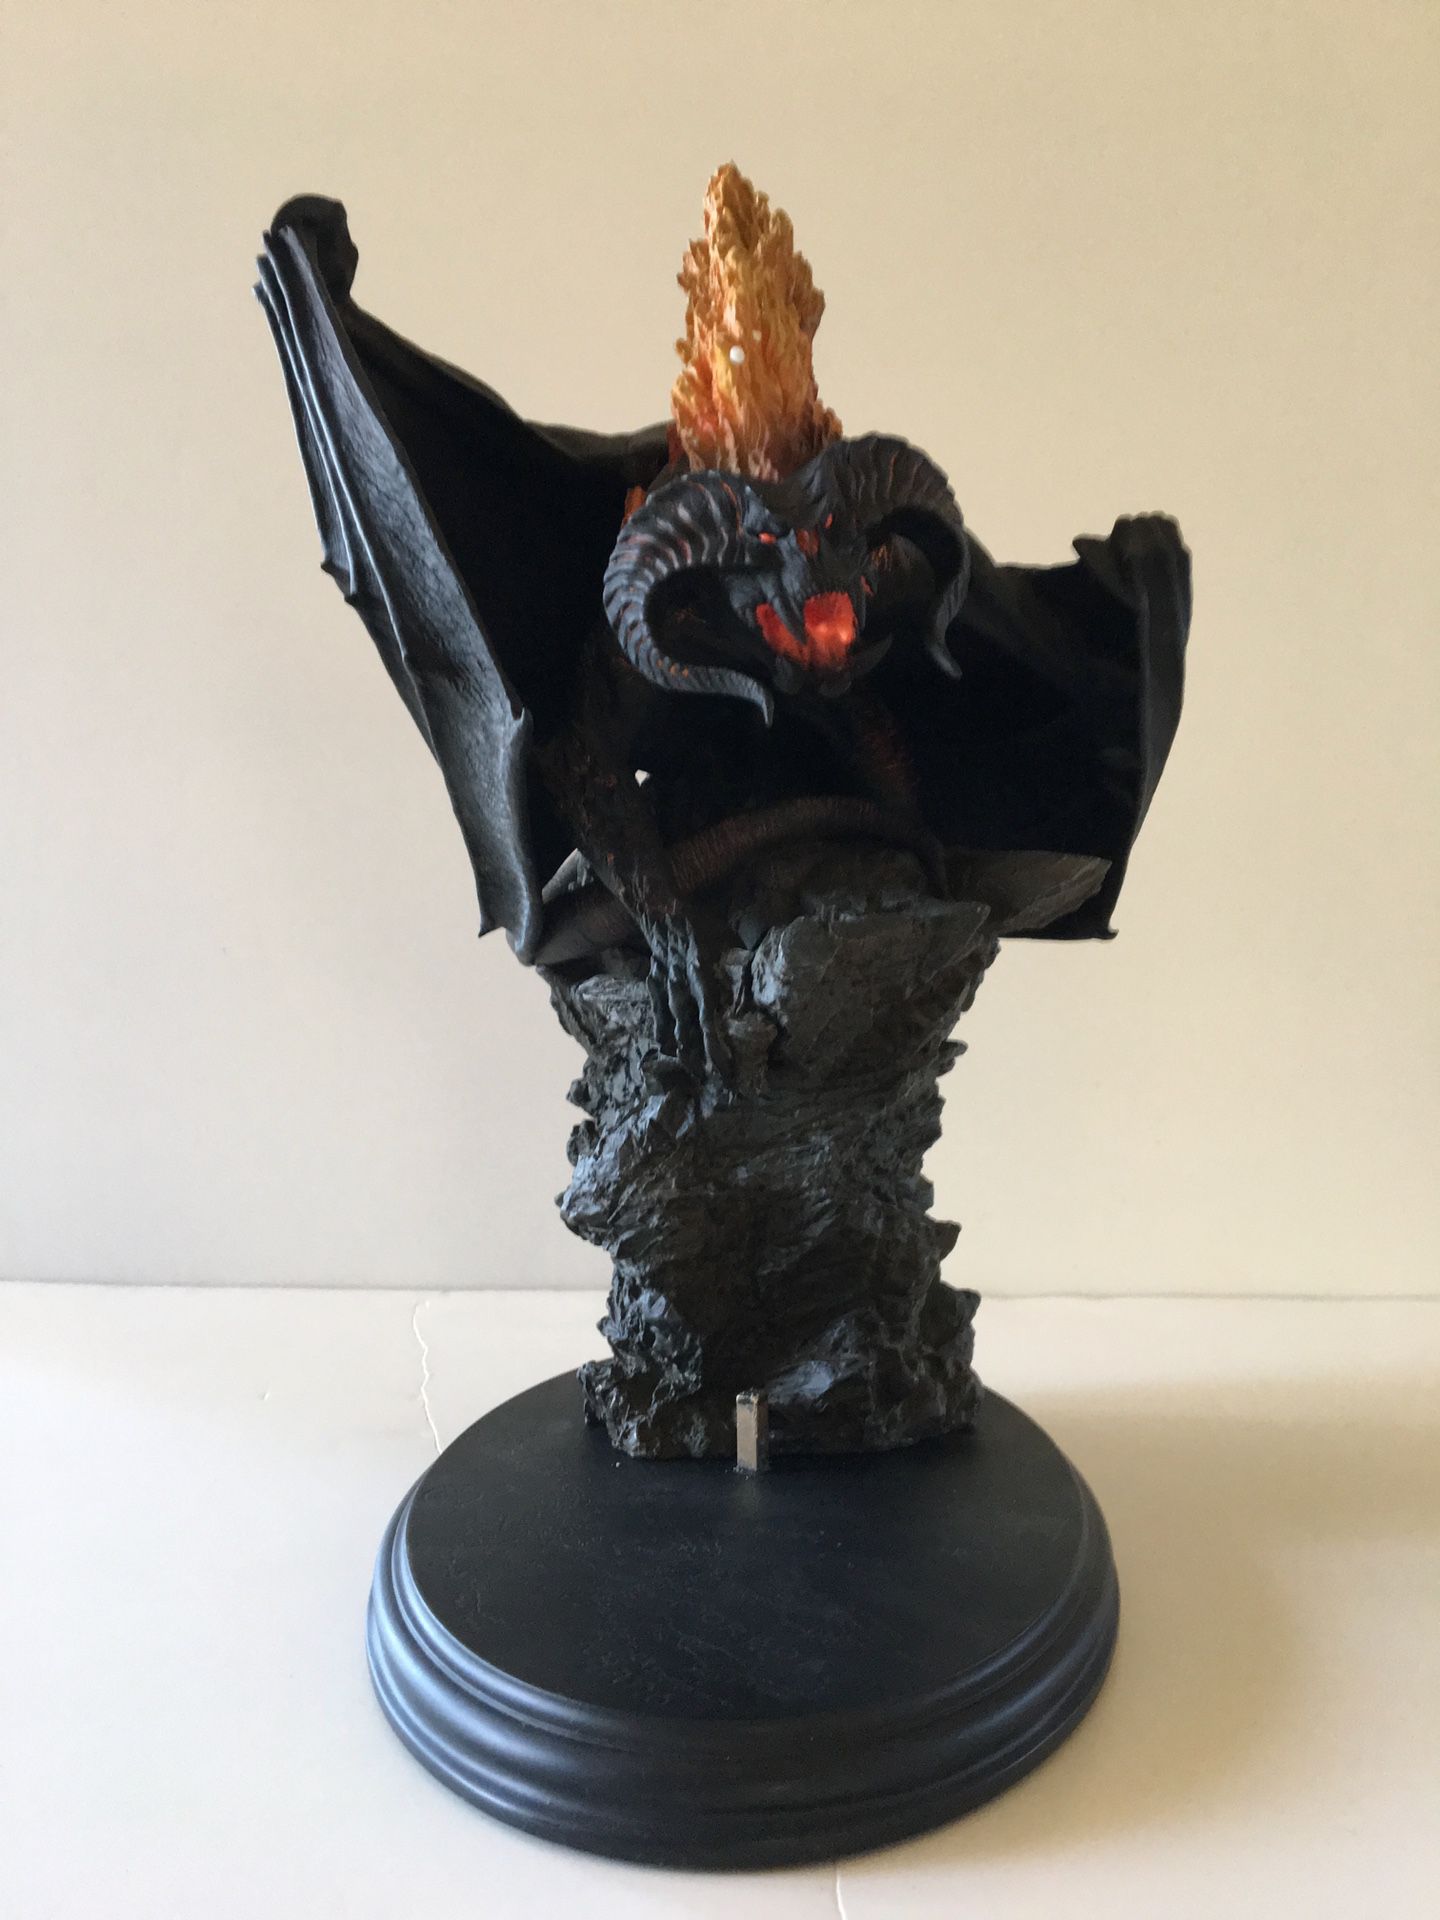 Sideshow Collectibles LOTR Balrog Statue